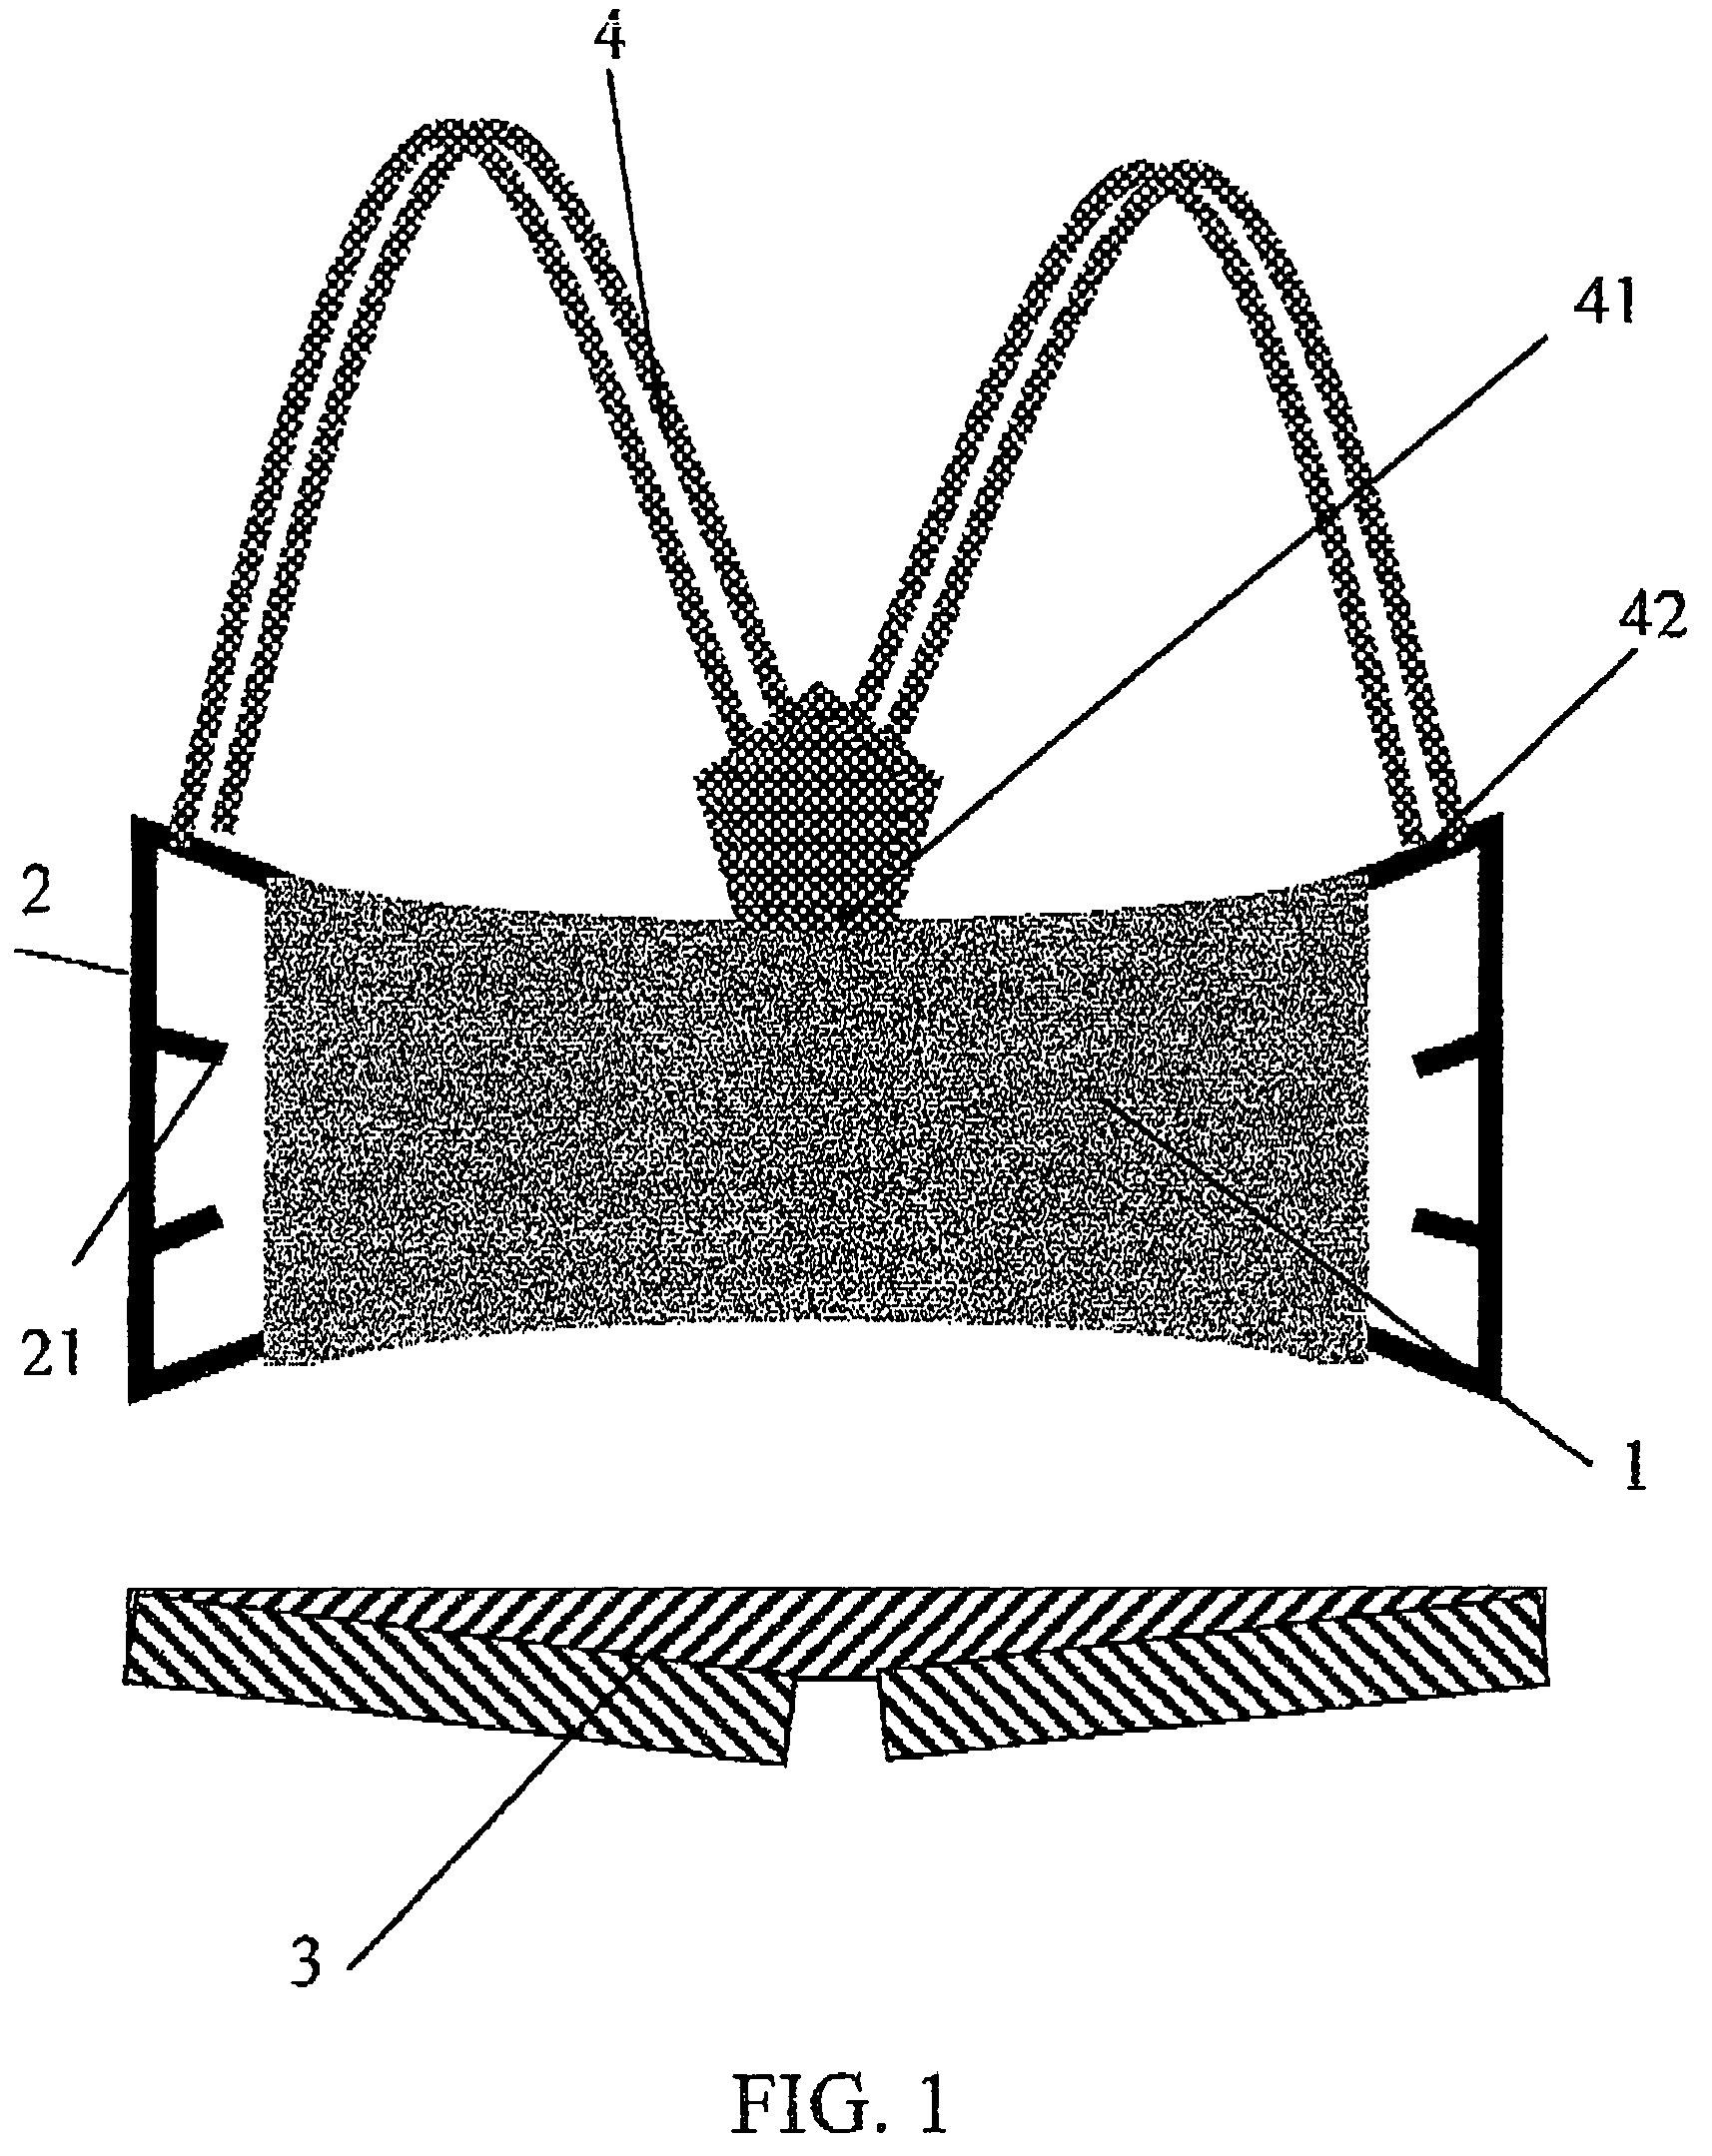 Apparatus for working the abdominal muscles while protecting the back and promoting diaphragmatic breathing